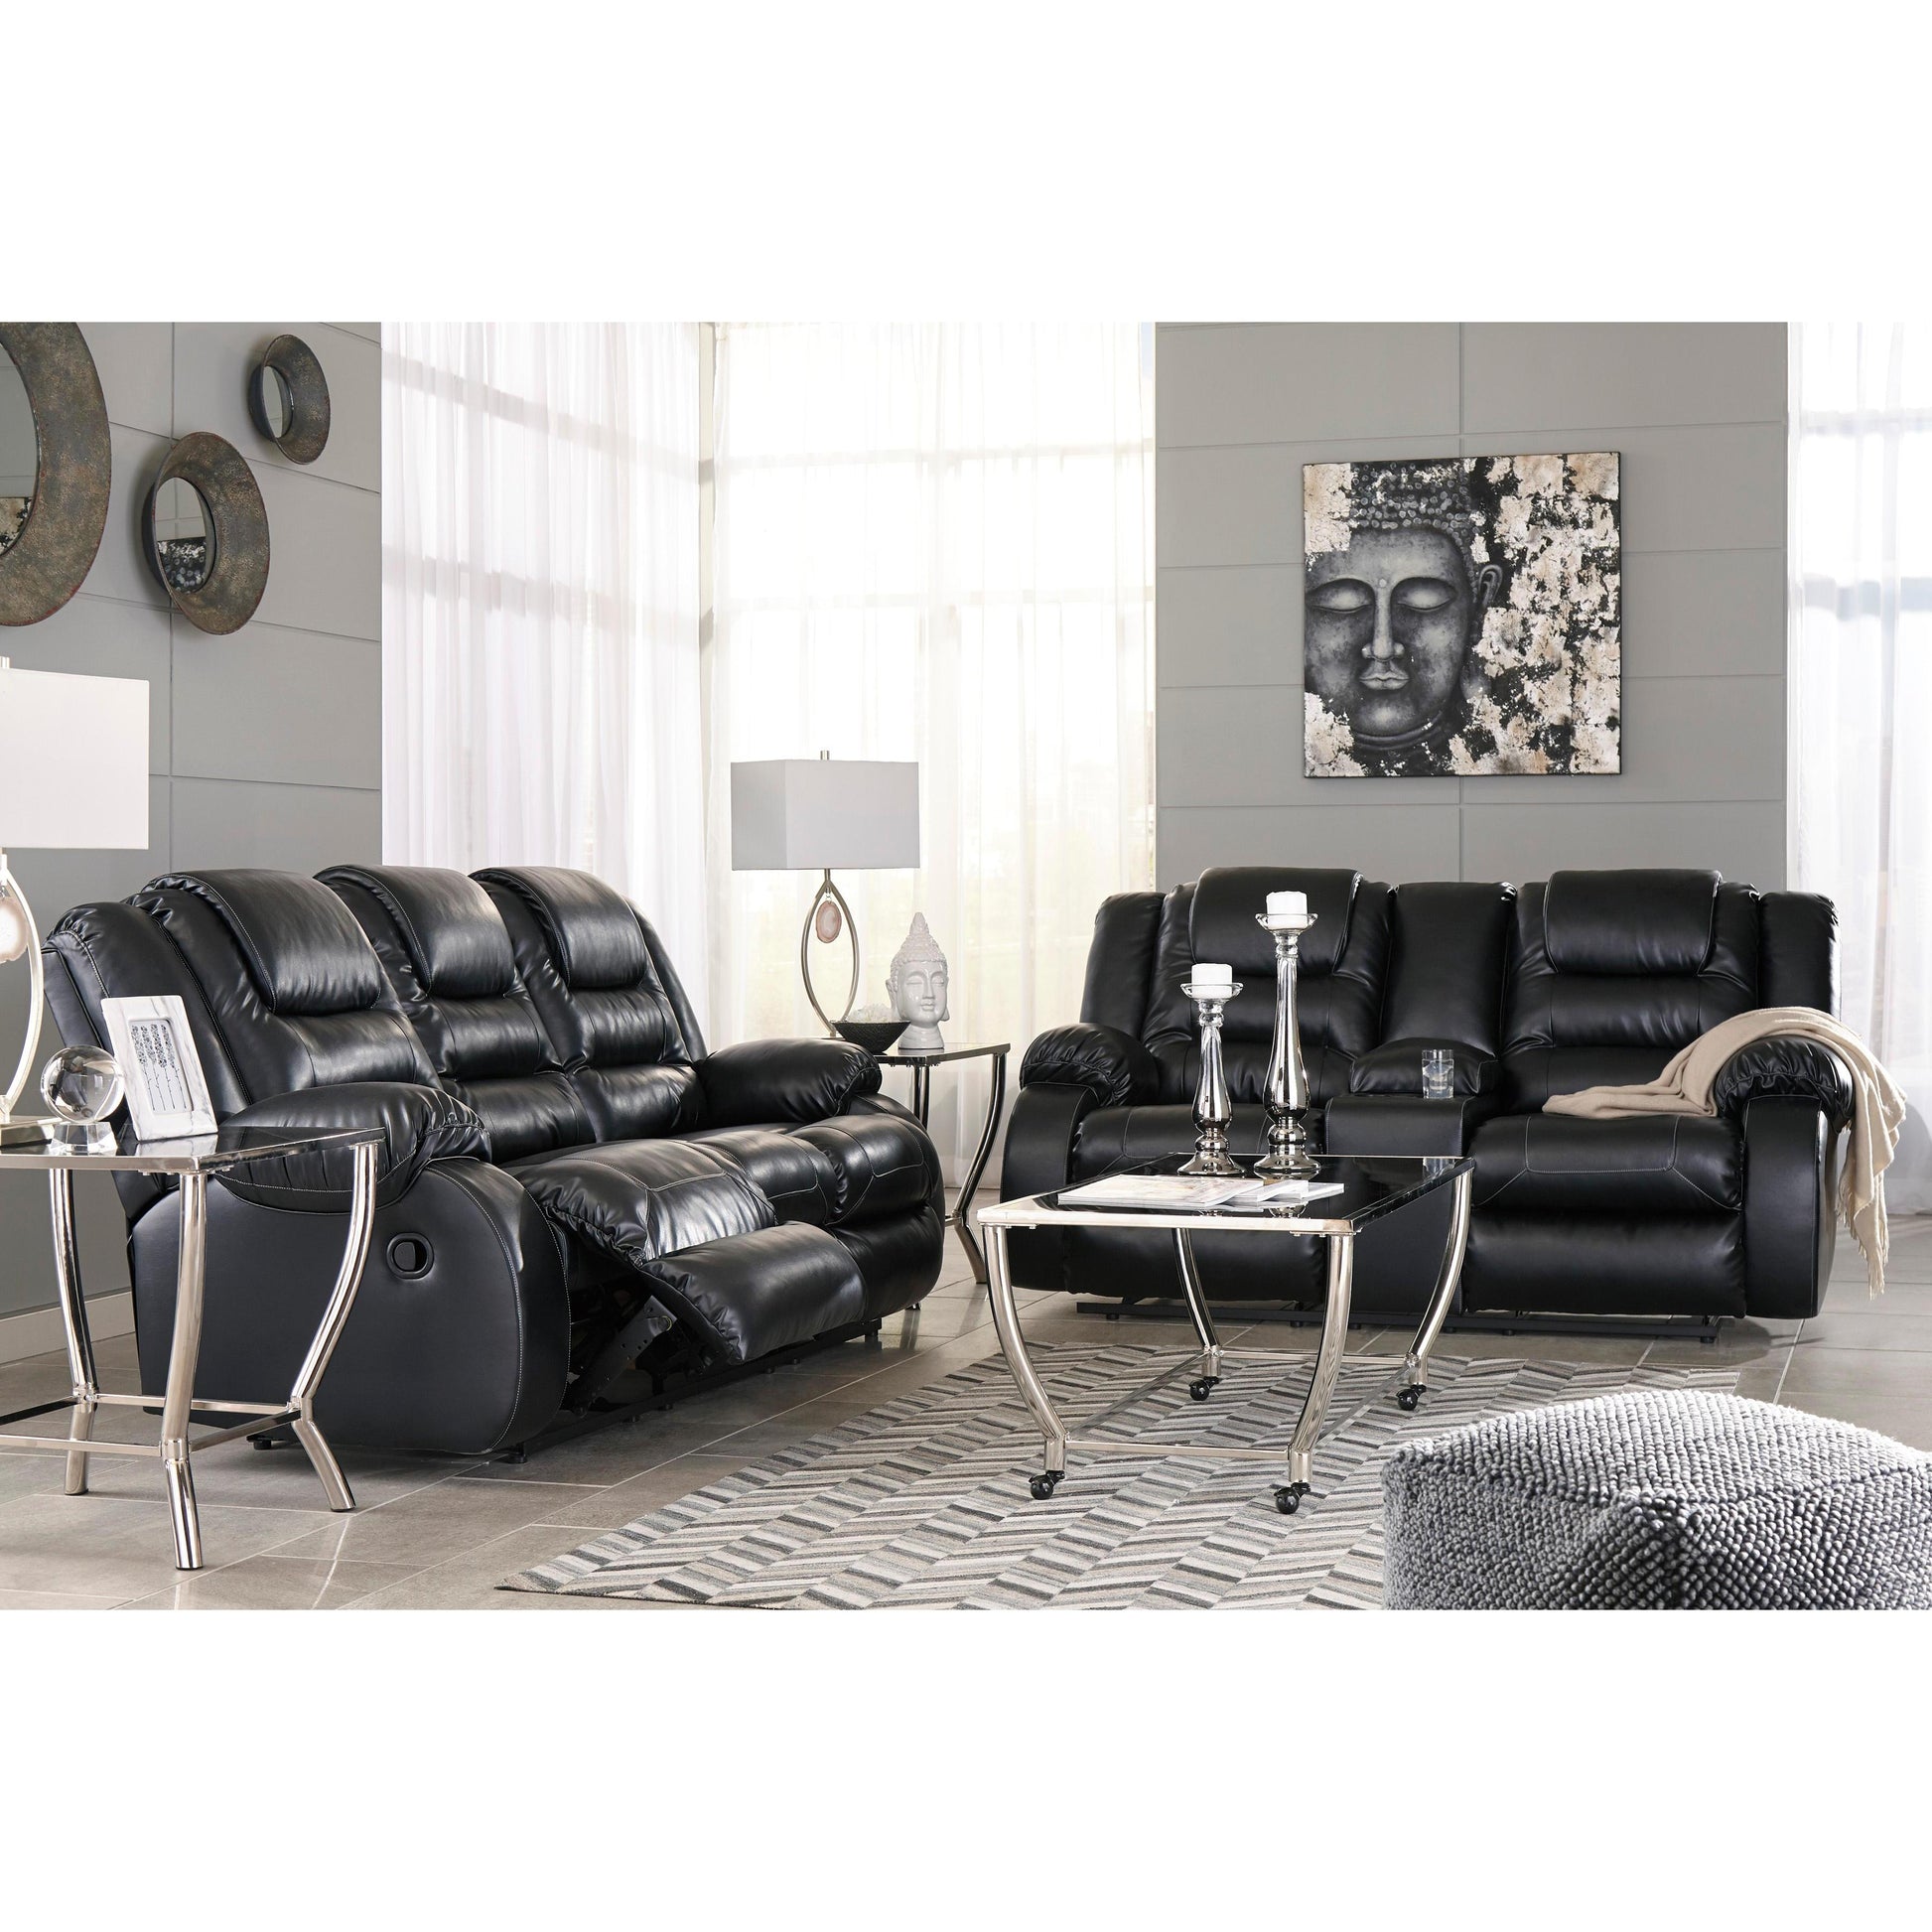 Signature Design by Ashley Vacherie Reclining Leather Look Loveseat 7930894